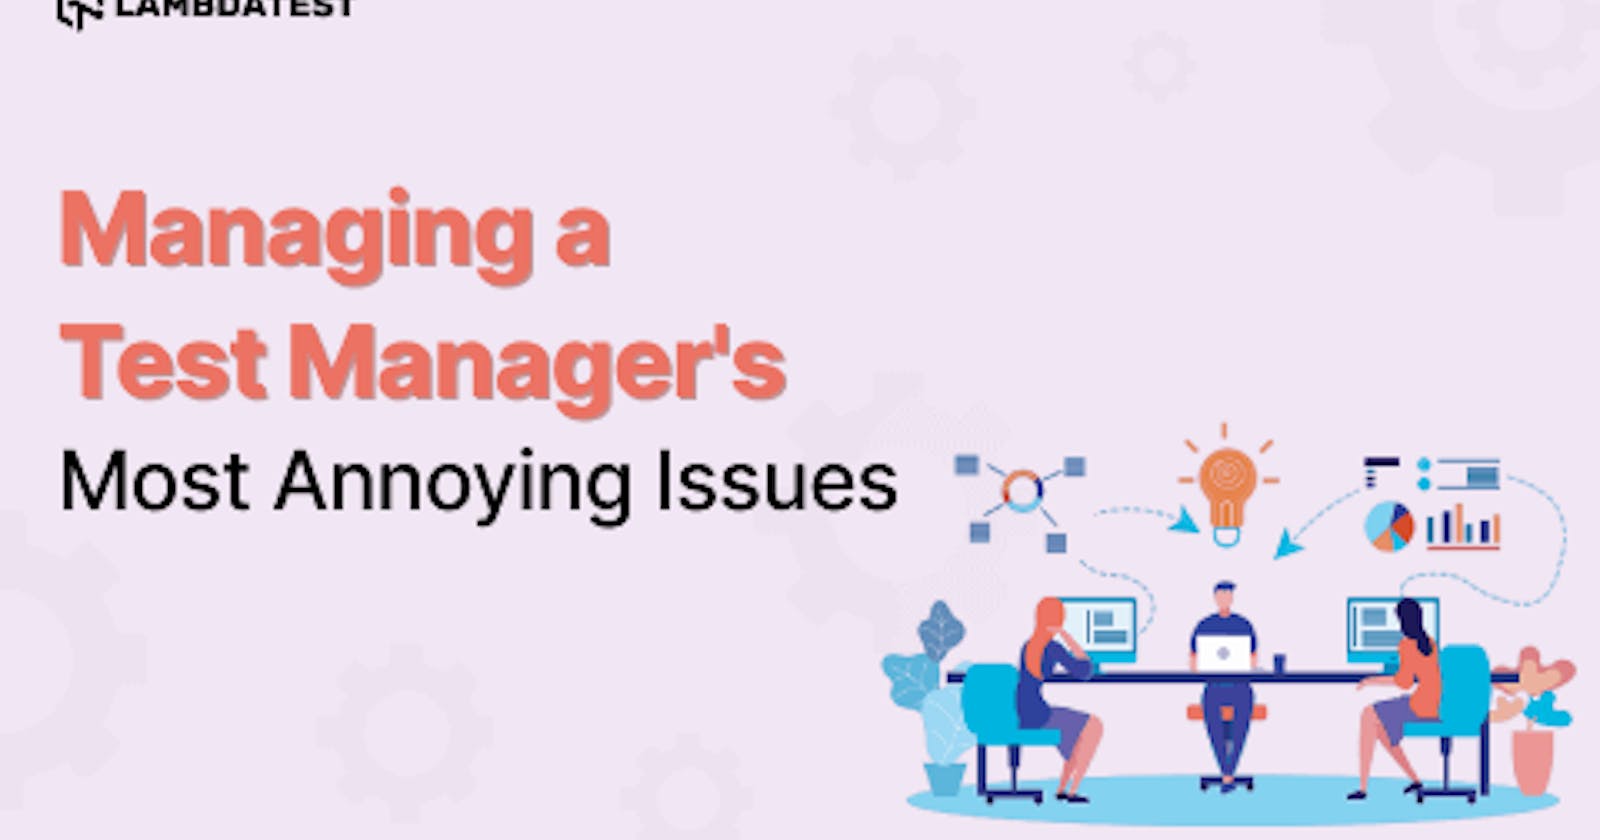 Managing a Test Manager’s Most Annoying Issues